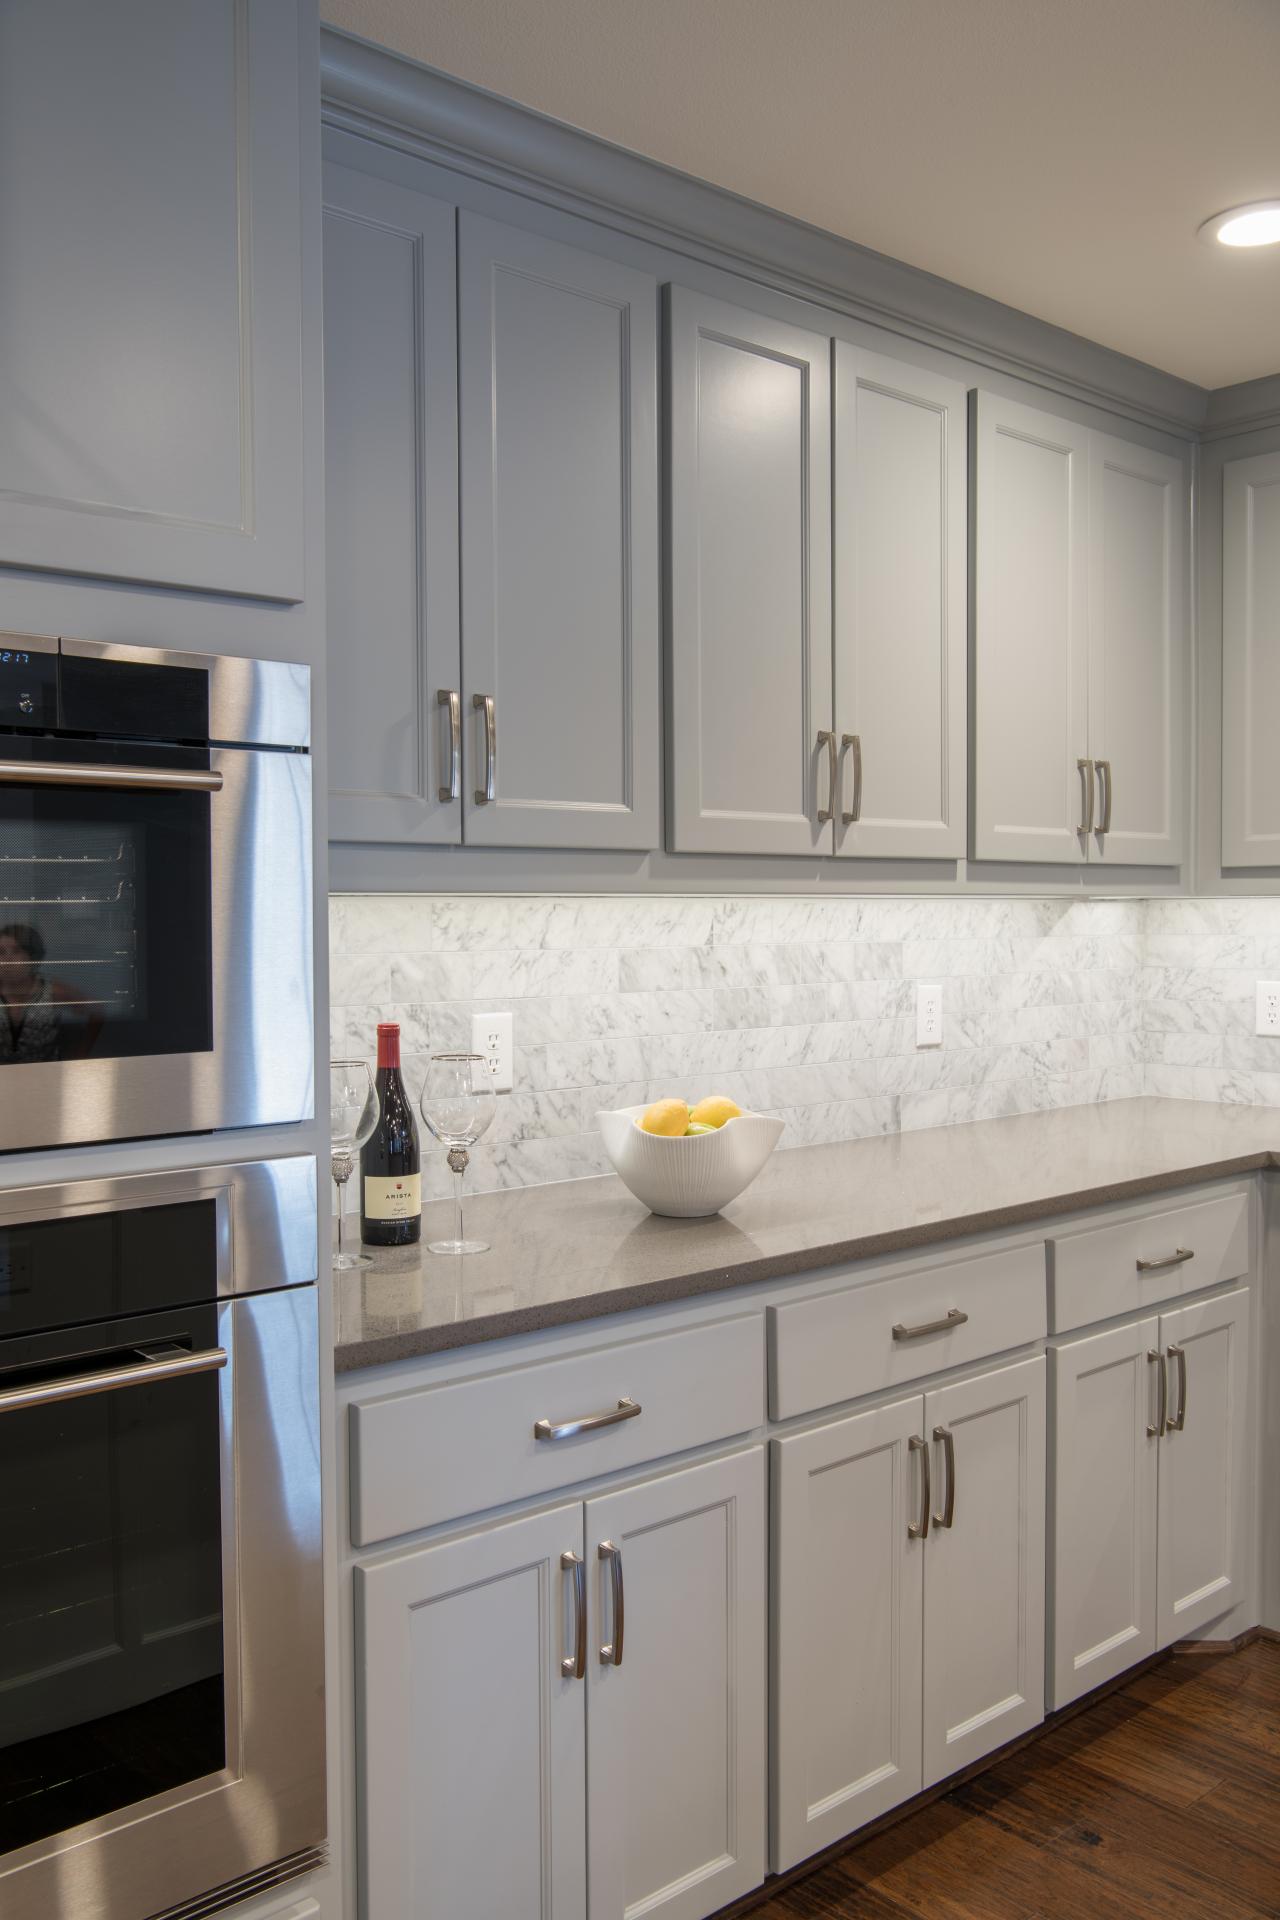 Modern White Kitchen Cabinets And Grey Backsplash with Simple Decor